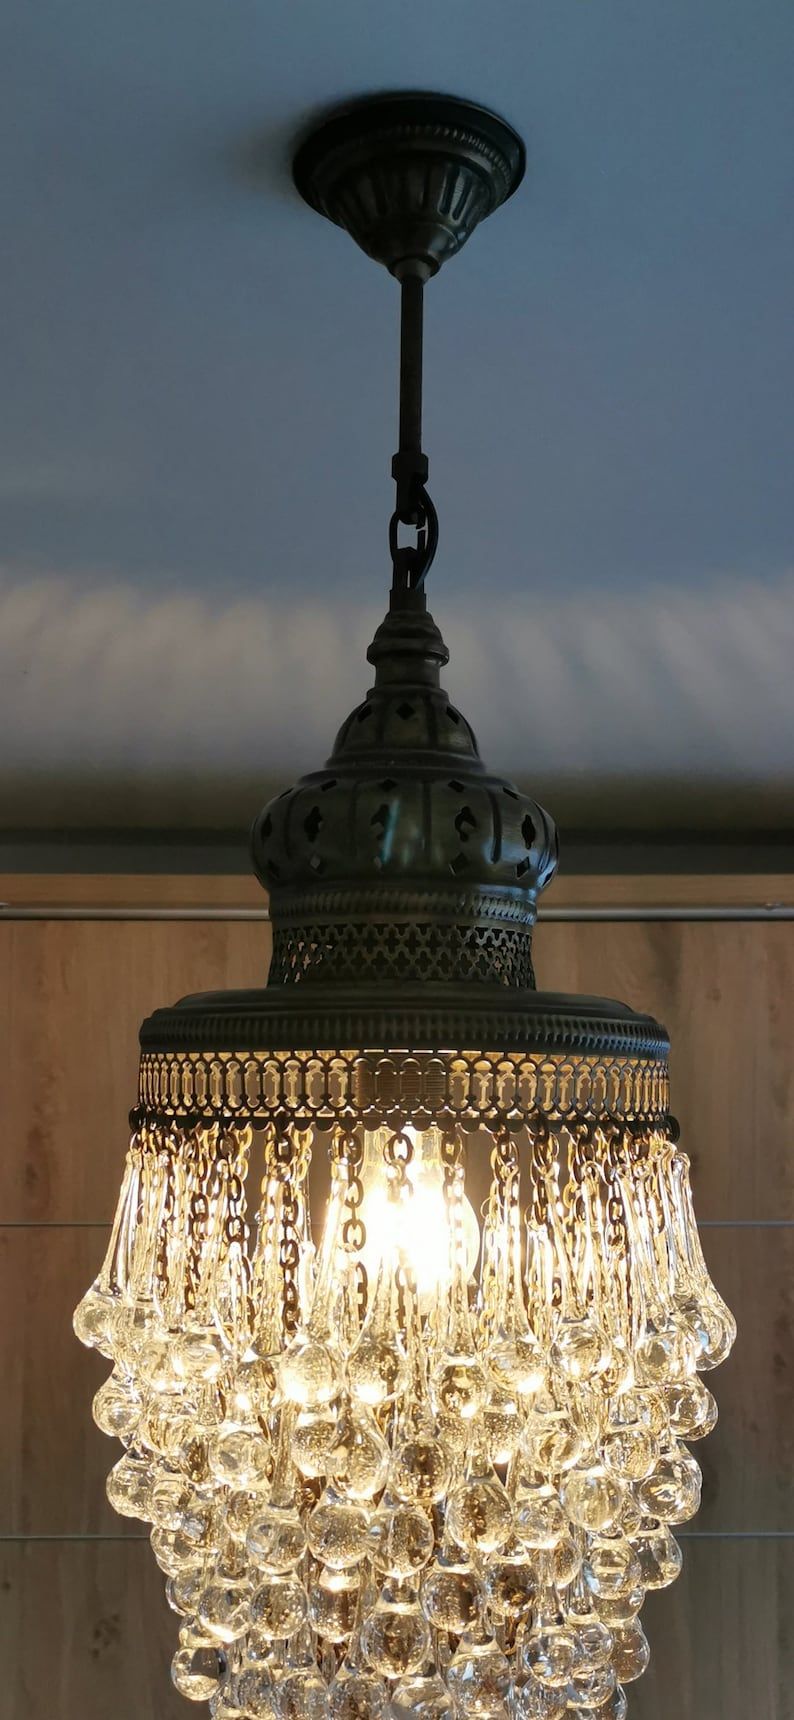 Elevate Your Bathroom Decor with Stunning Chandelier Ceiling Lights